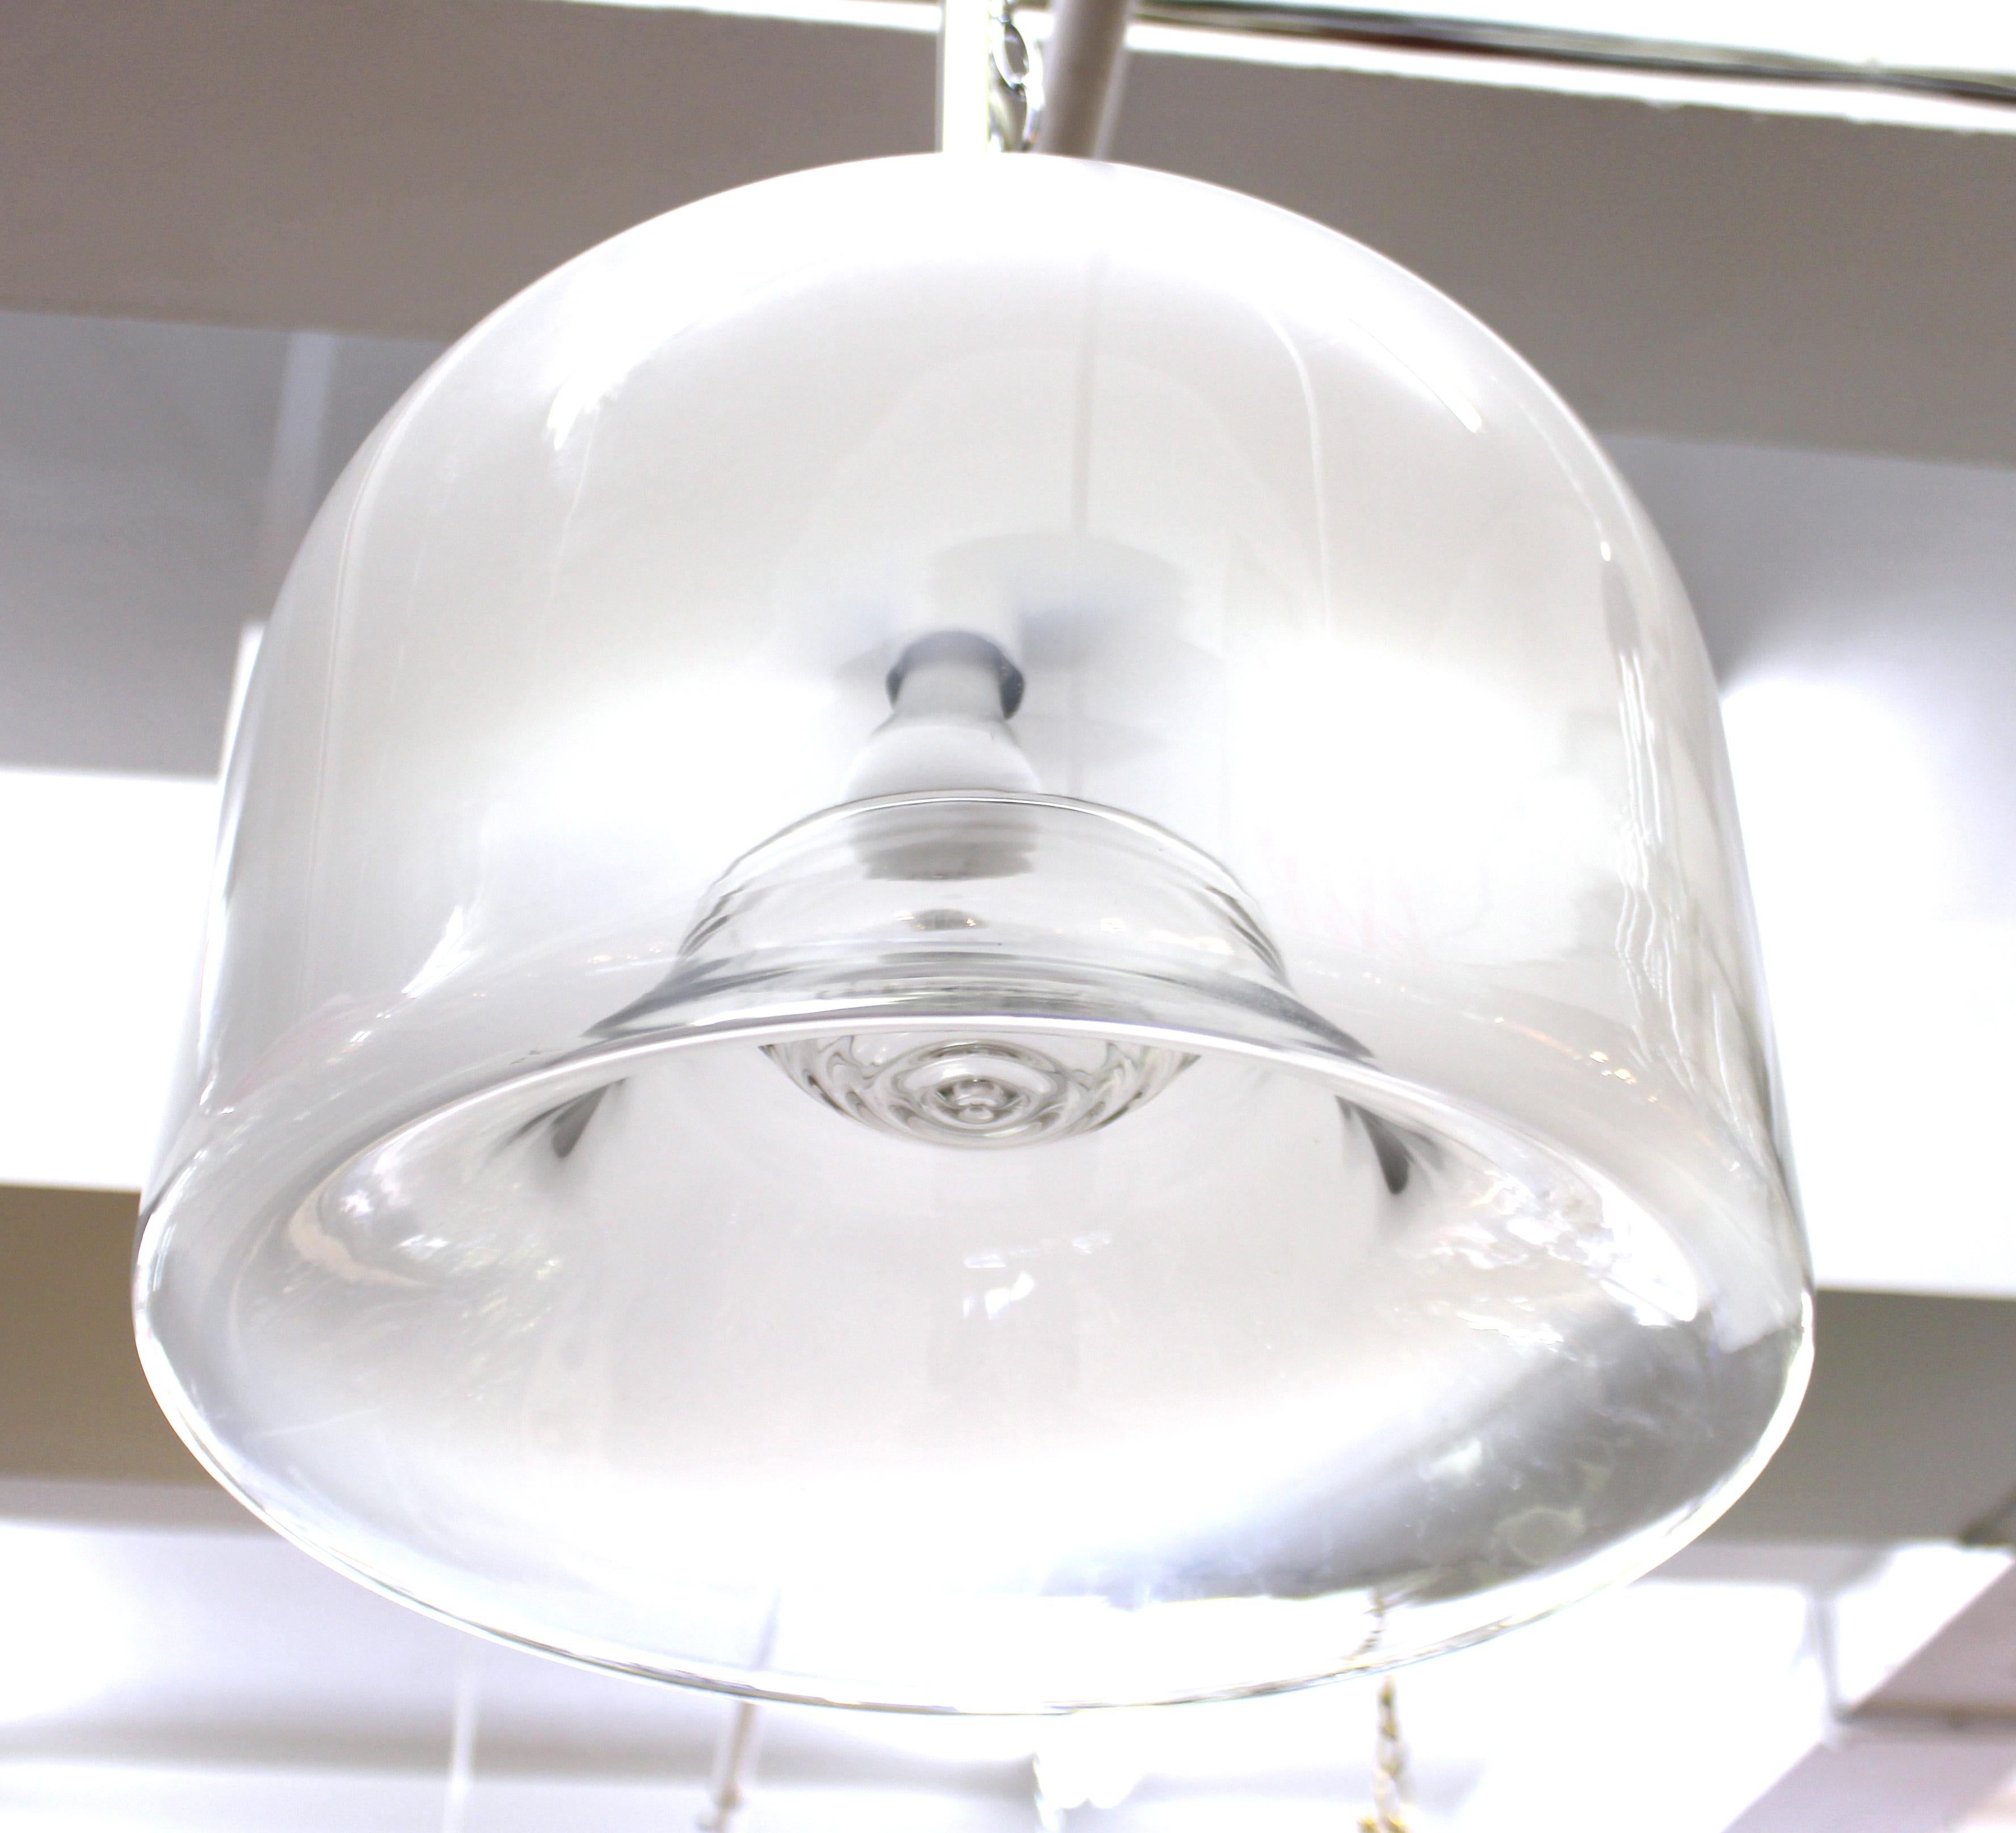 Modern dome glass pendant chandelier with white glass fading into clear glass and a decorative ripple effect of the glass near the light source. The piece has a faded label on the top of the glass dome and is in great vintage condition with